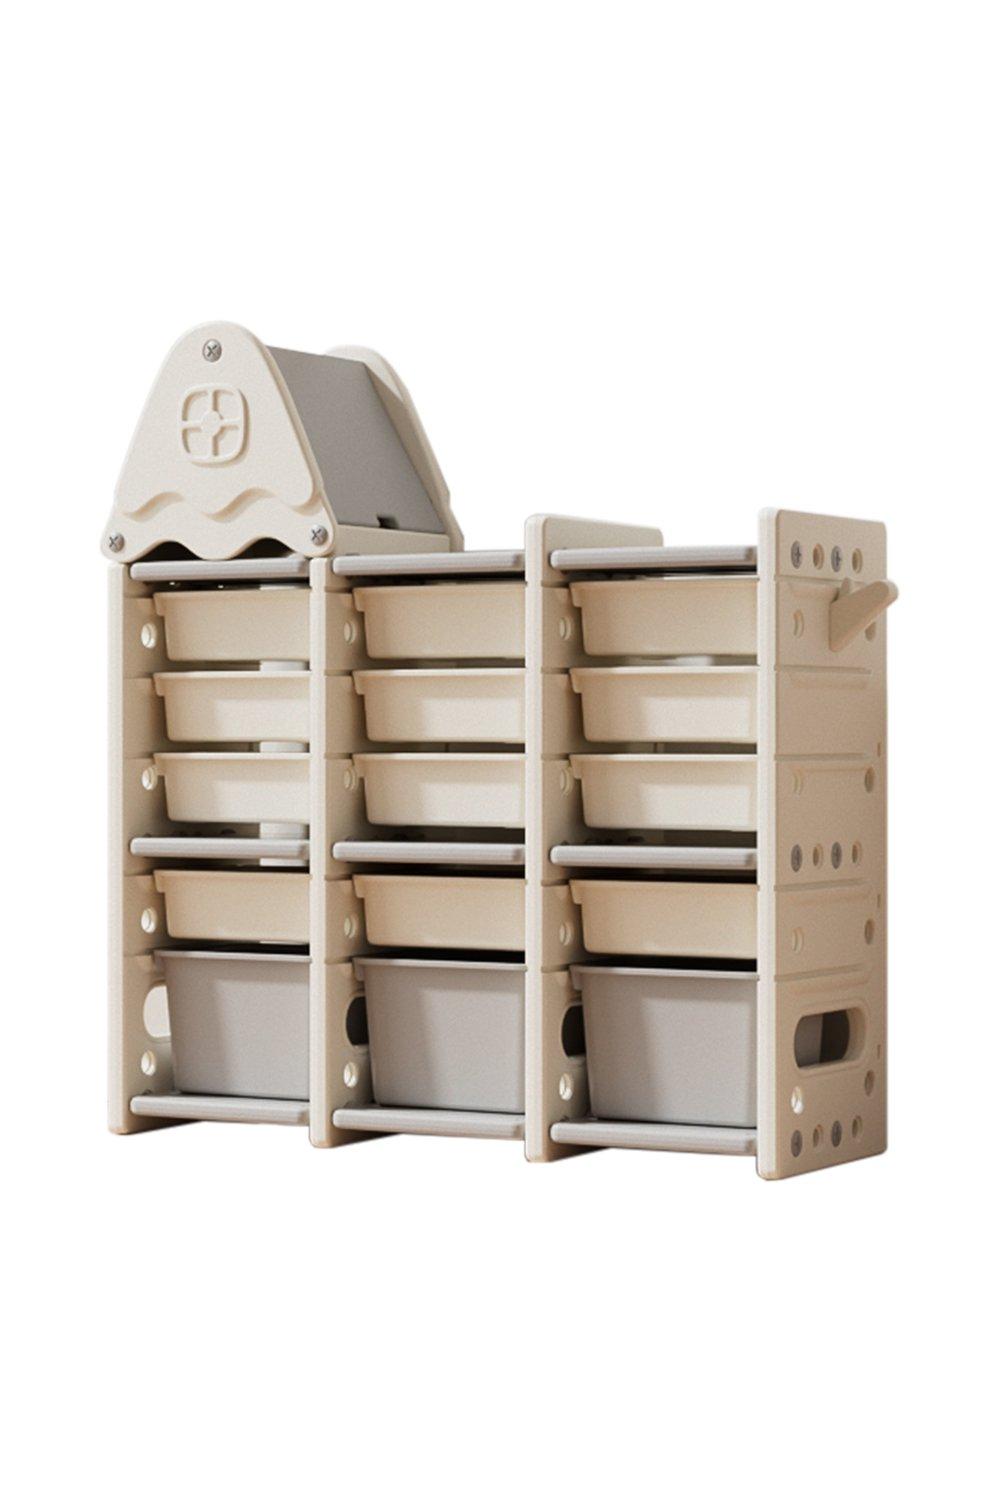 5 Tier Plastic Storage Organizer with 15 Pull-Out Bins and Roof Top